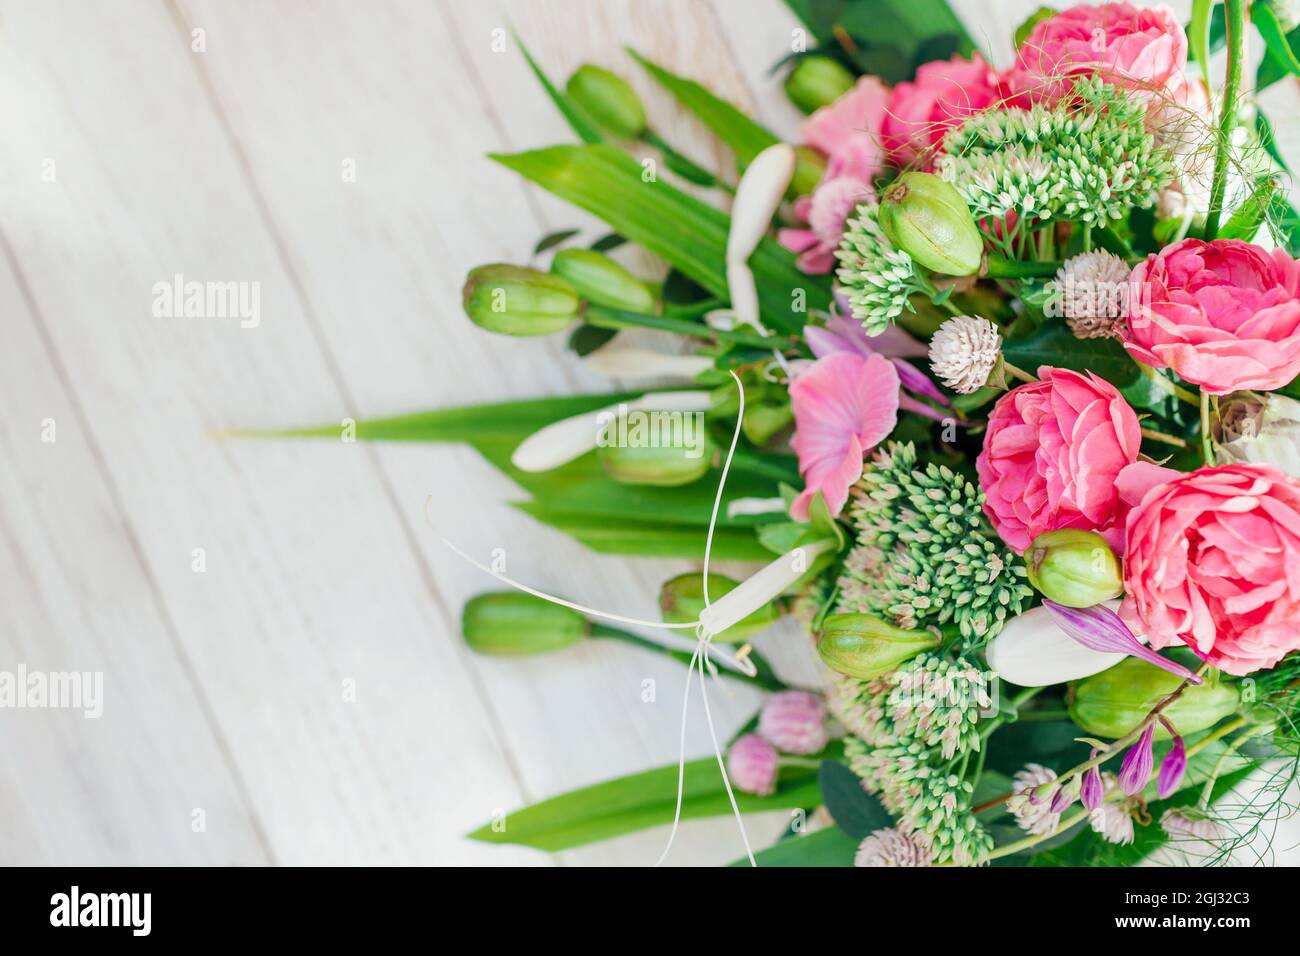 Bouquet of pink white green flowers arranged on wooden background. Roses, sedum, hosta, seed pods, gomphrena and grasses Stock Photo